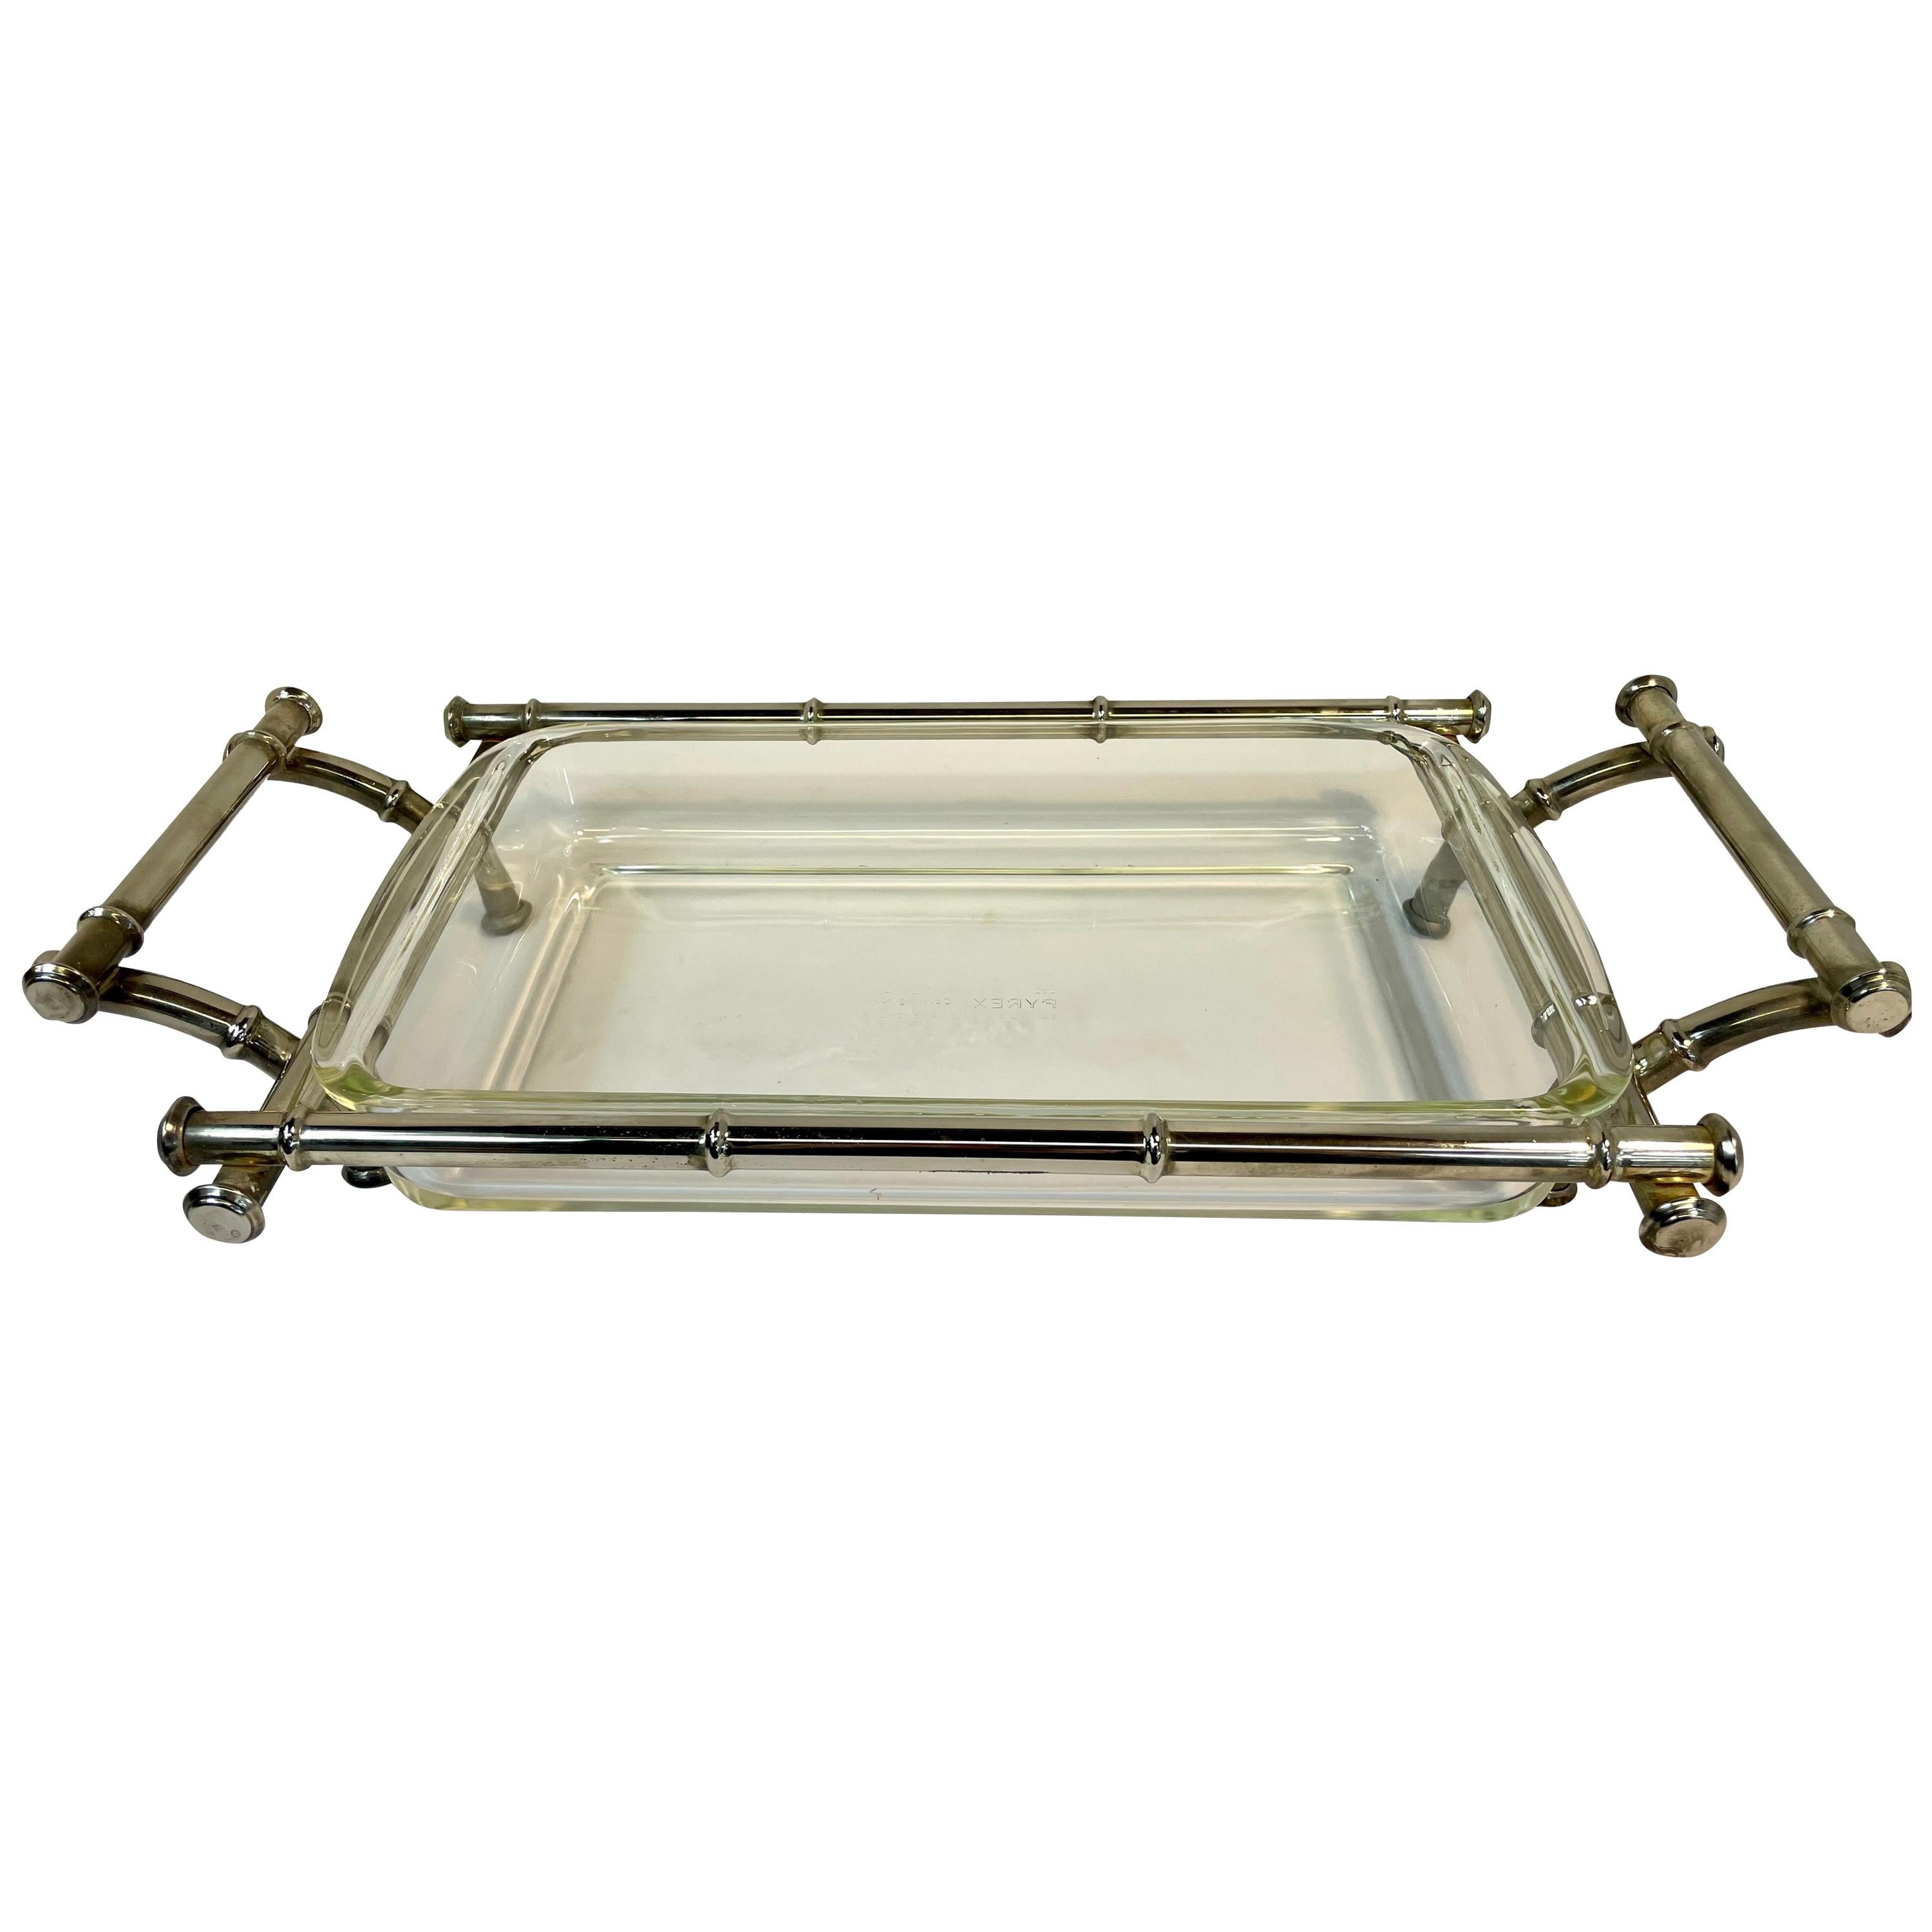 Faux Bamboo Silver Plate Lasagna or Casserole Chafing Dish